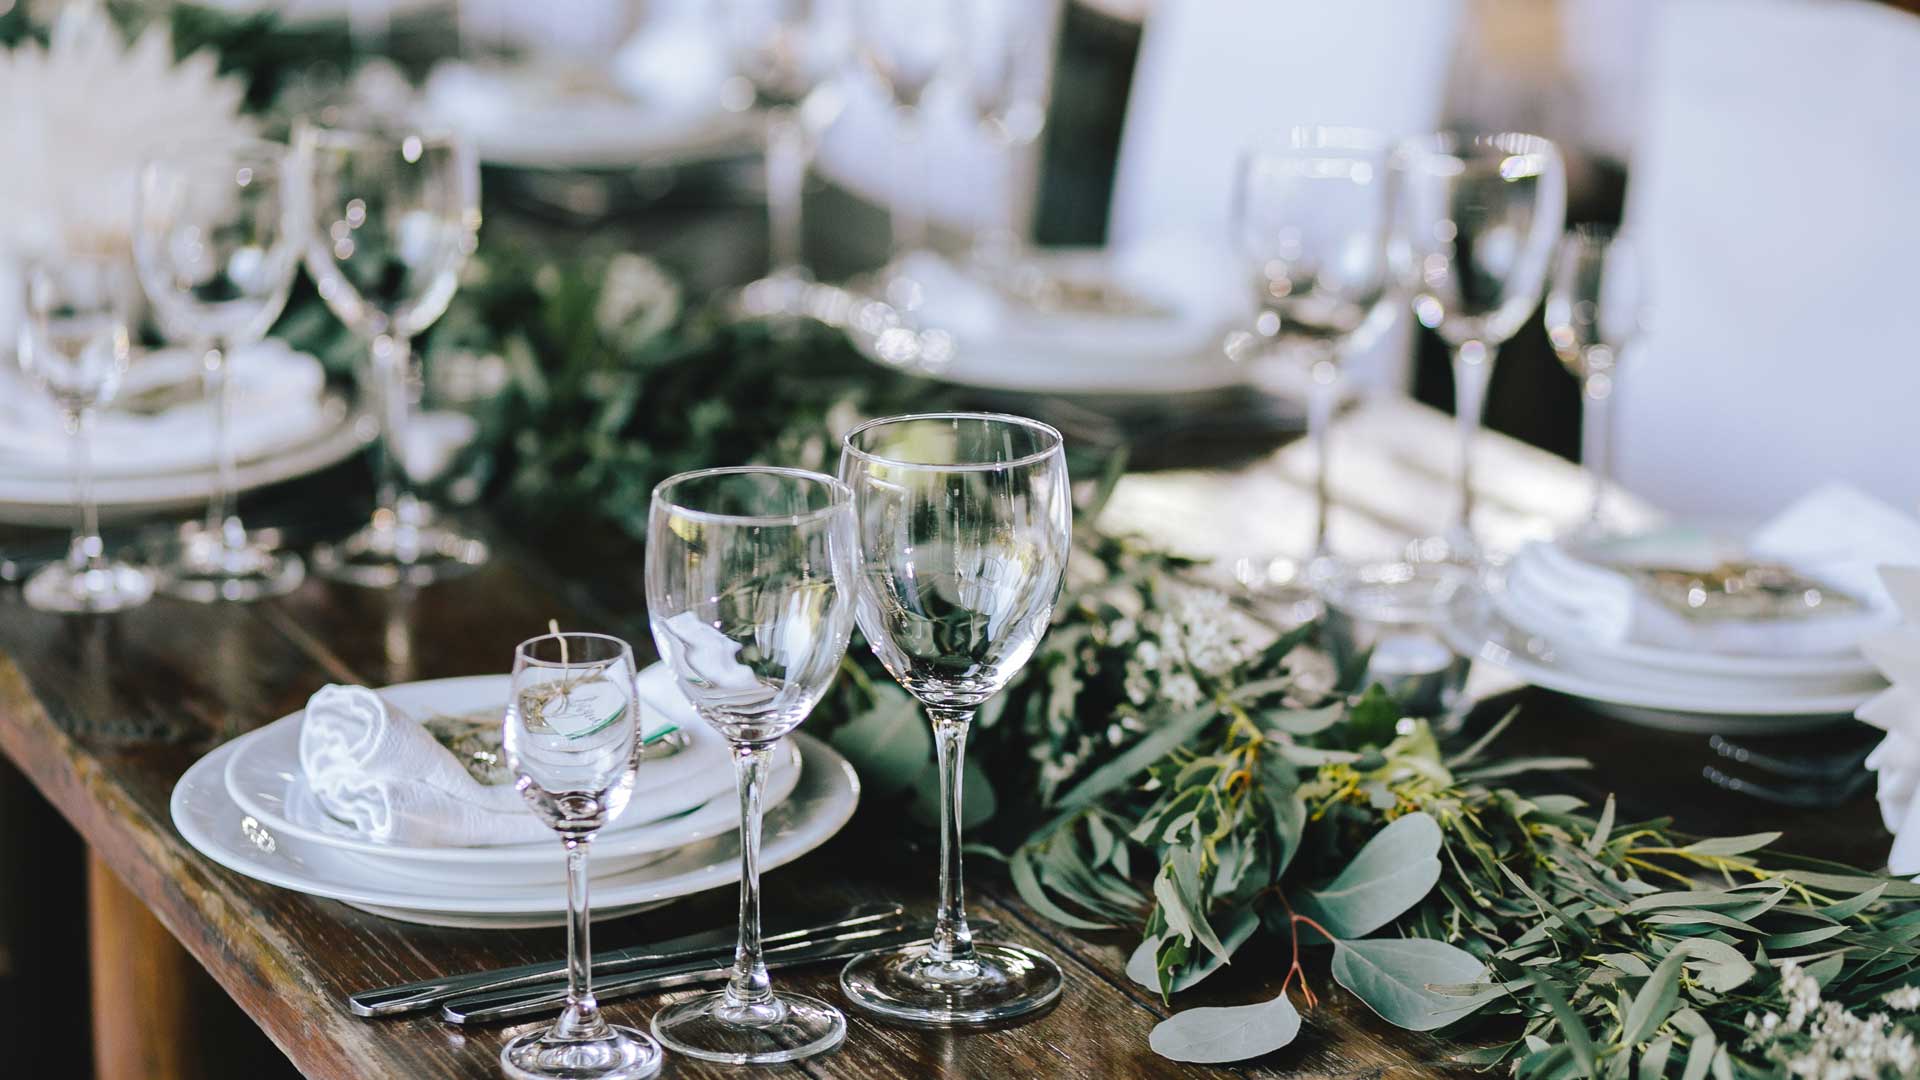 Restaurant-Catering-for-Events-How-to-Price-Them-Right